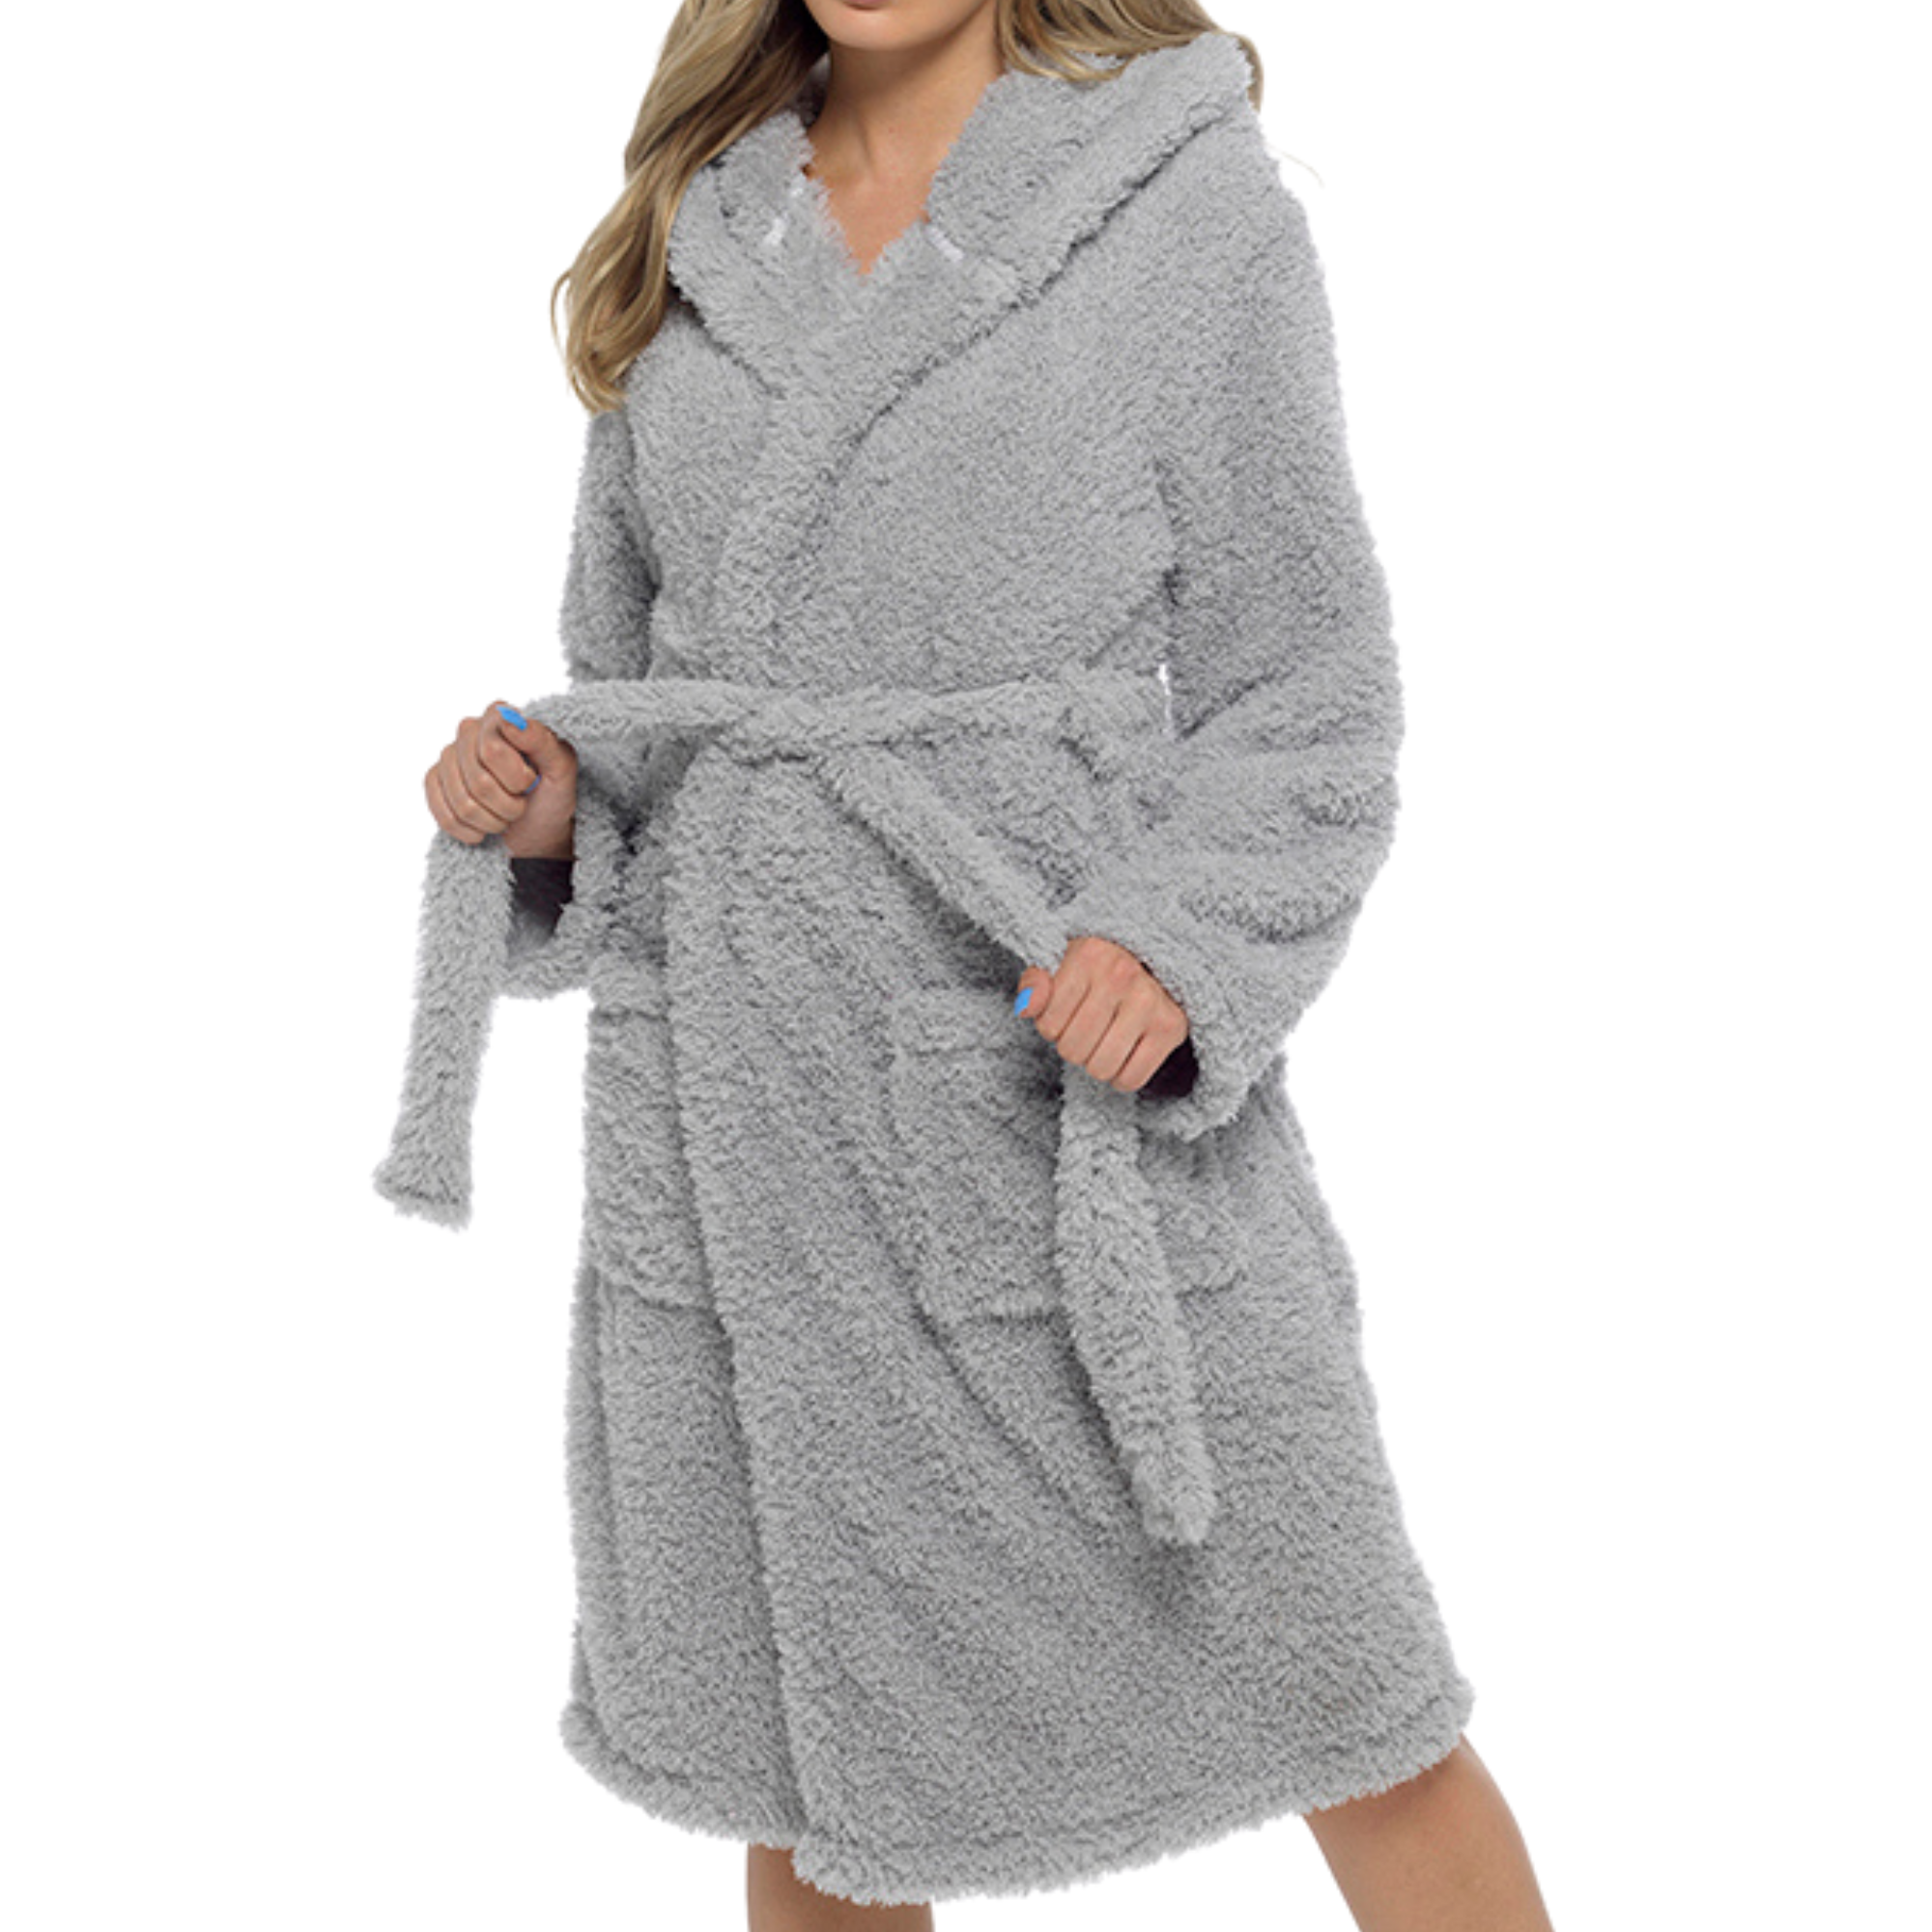 Grey Frosted Borg Hooded Robe